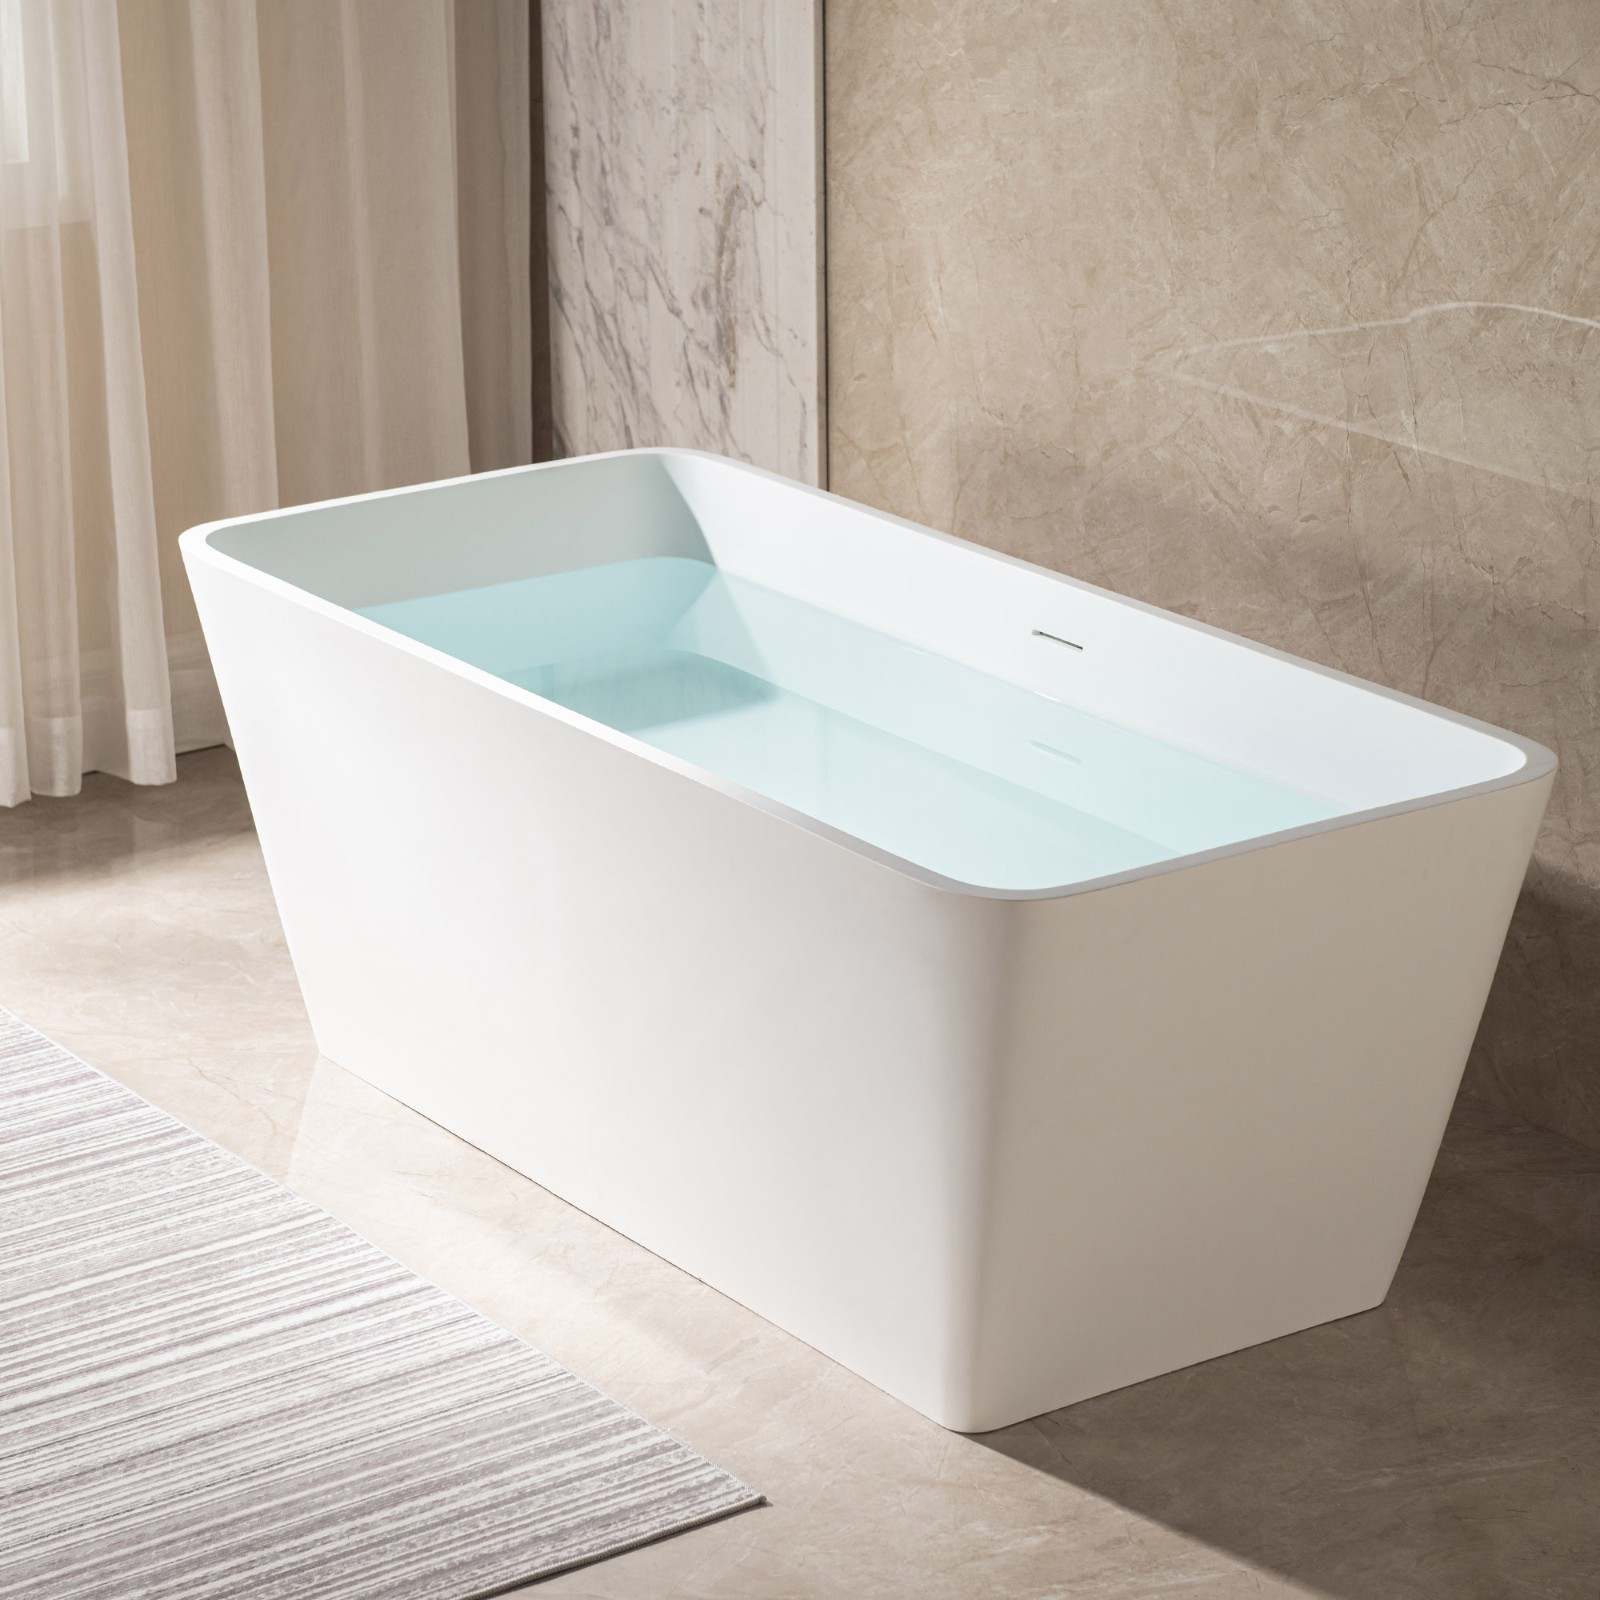  WOODBRIDGE 59 in. x 27.5 in. Luxury Contemporary Solid Surface Freestanding Bathtub in Matte White_1